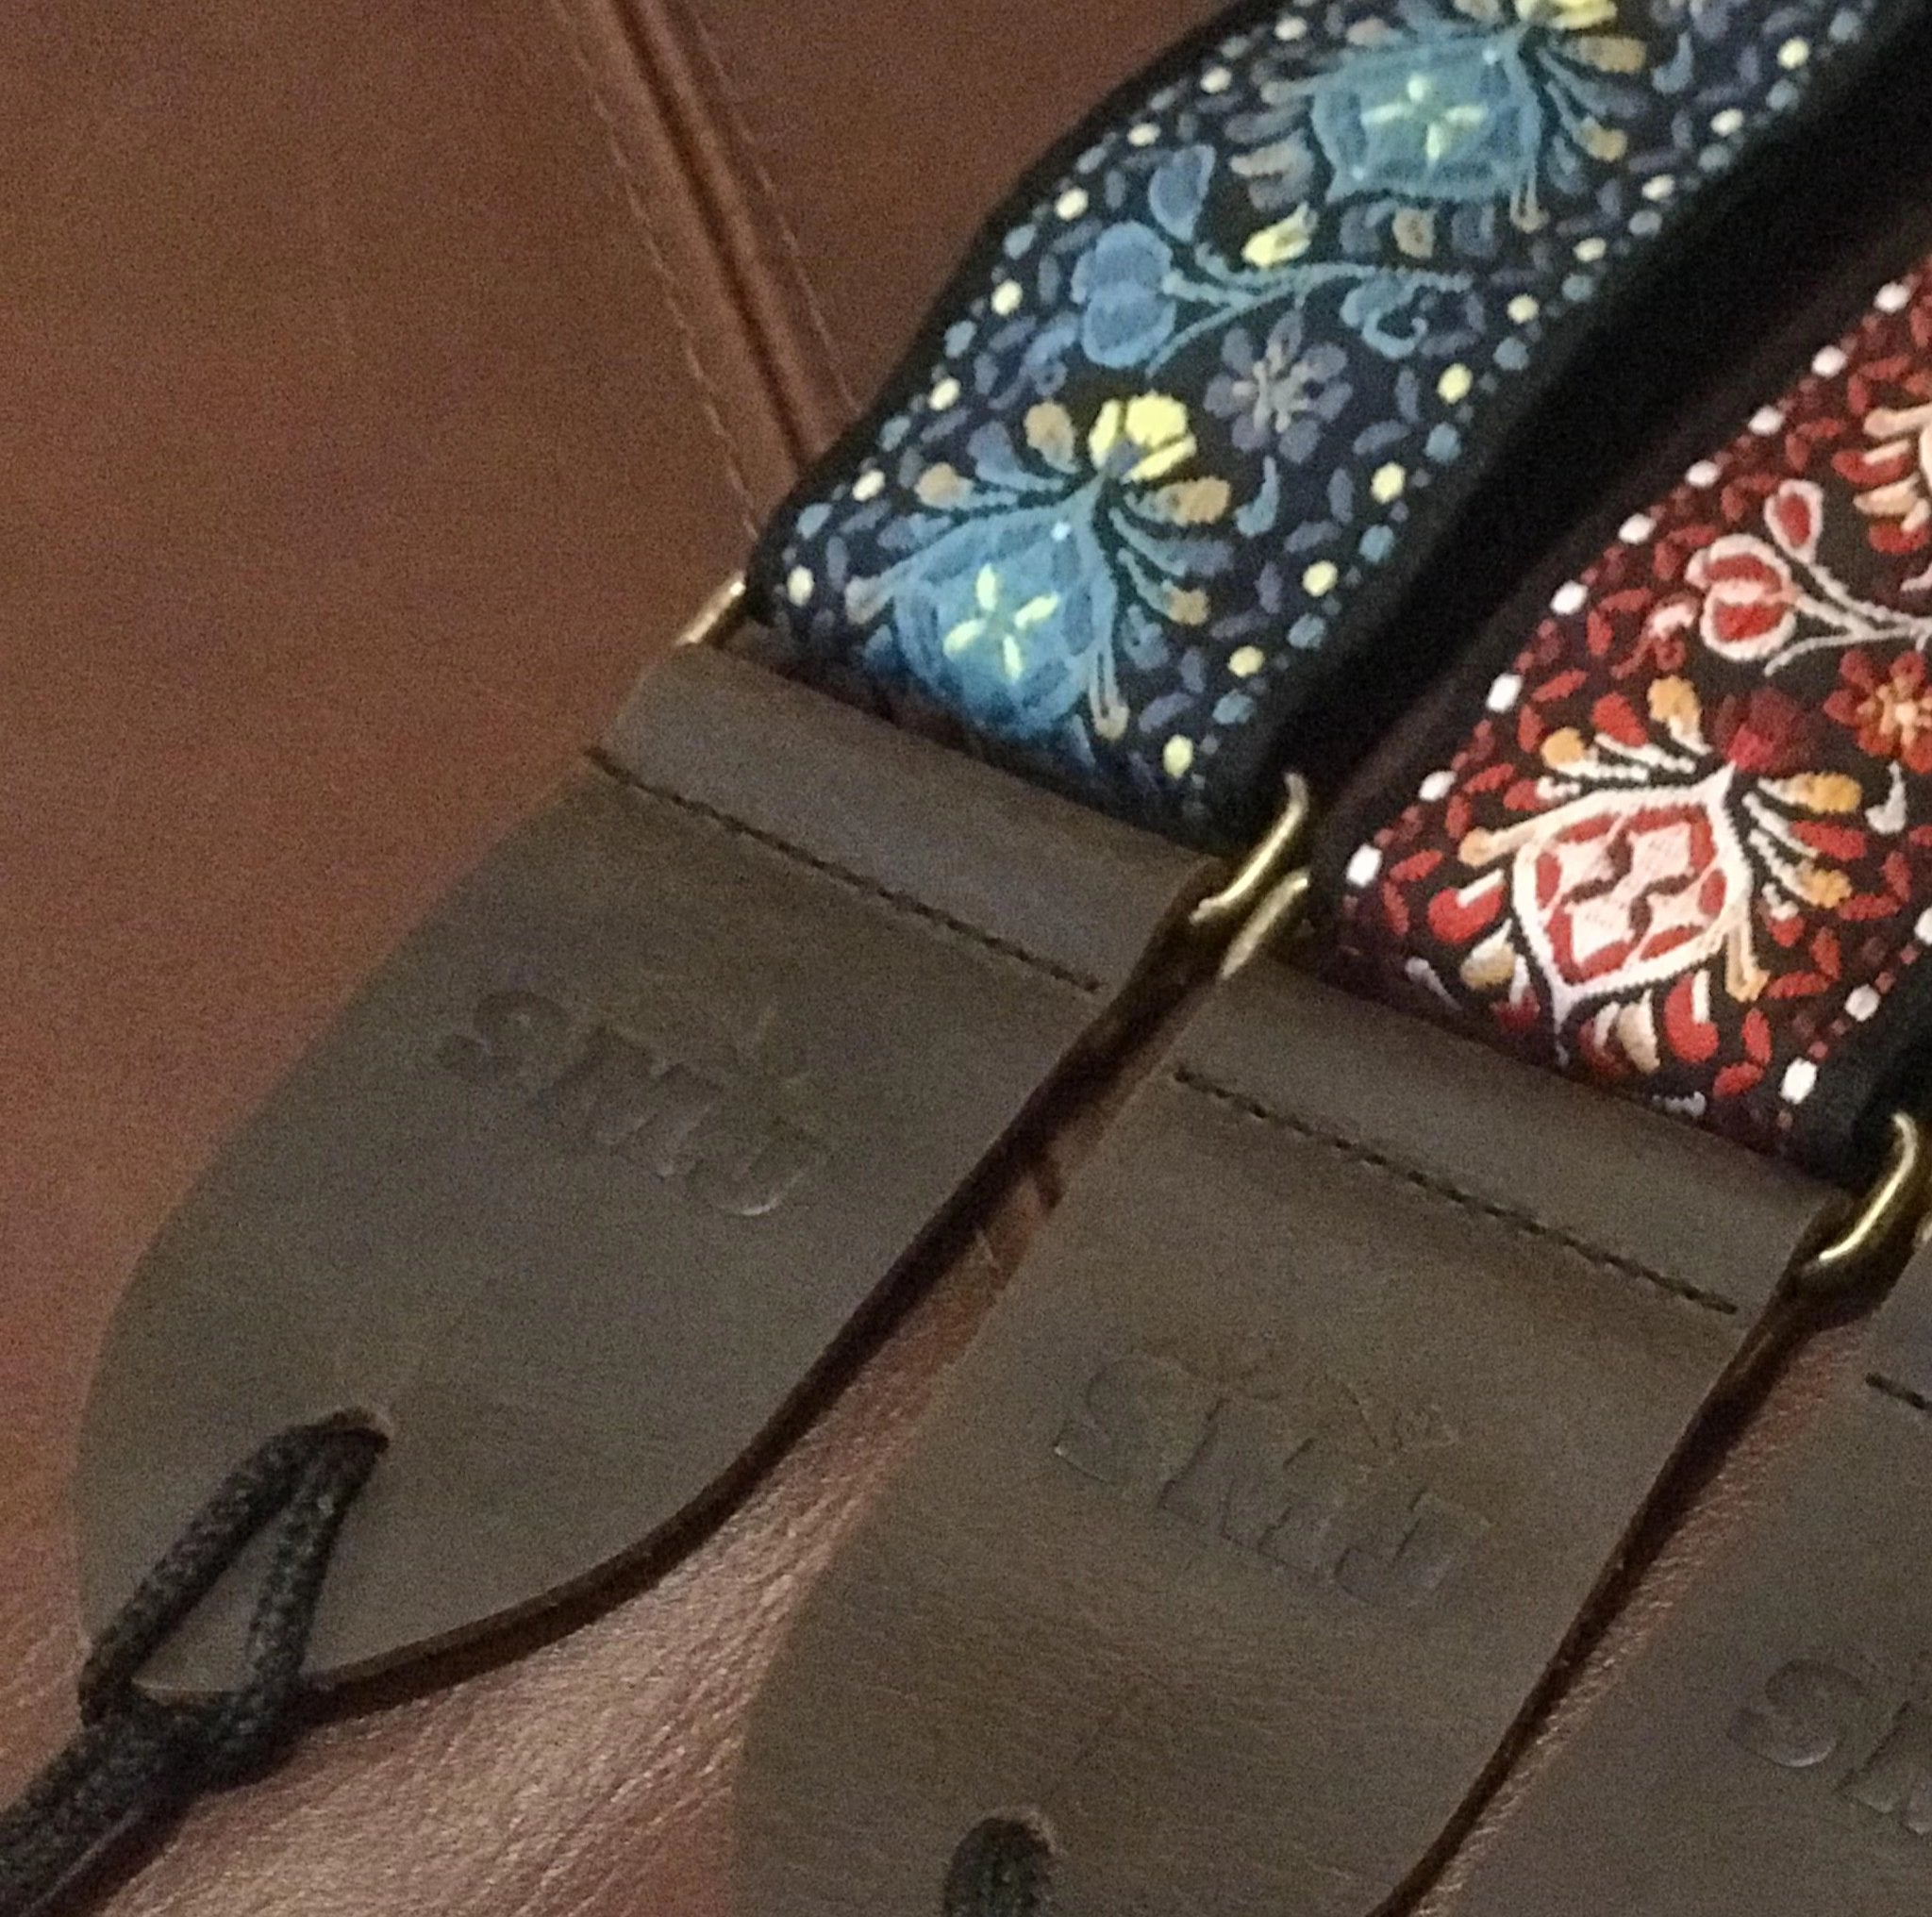 SMJ Reserve Collection "Adonis Blue" Guitar Strap, Accessory for sale at Richards Guitars.